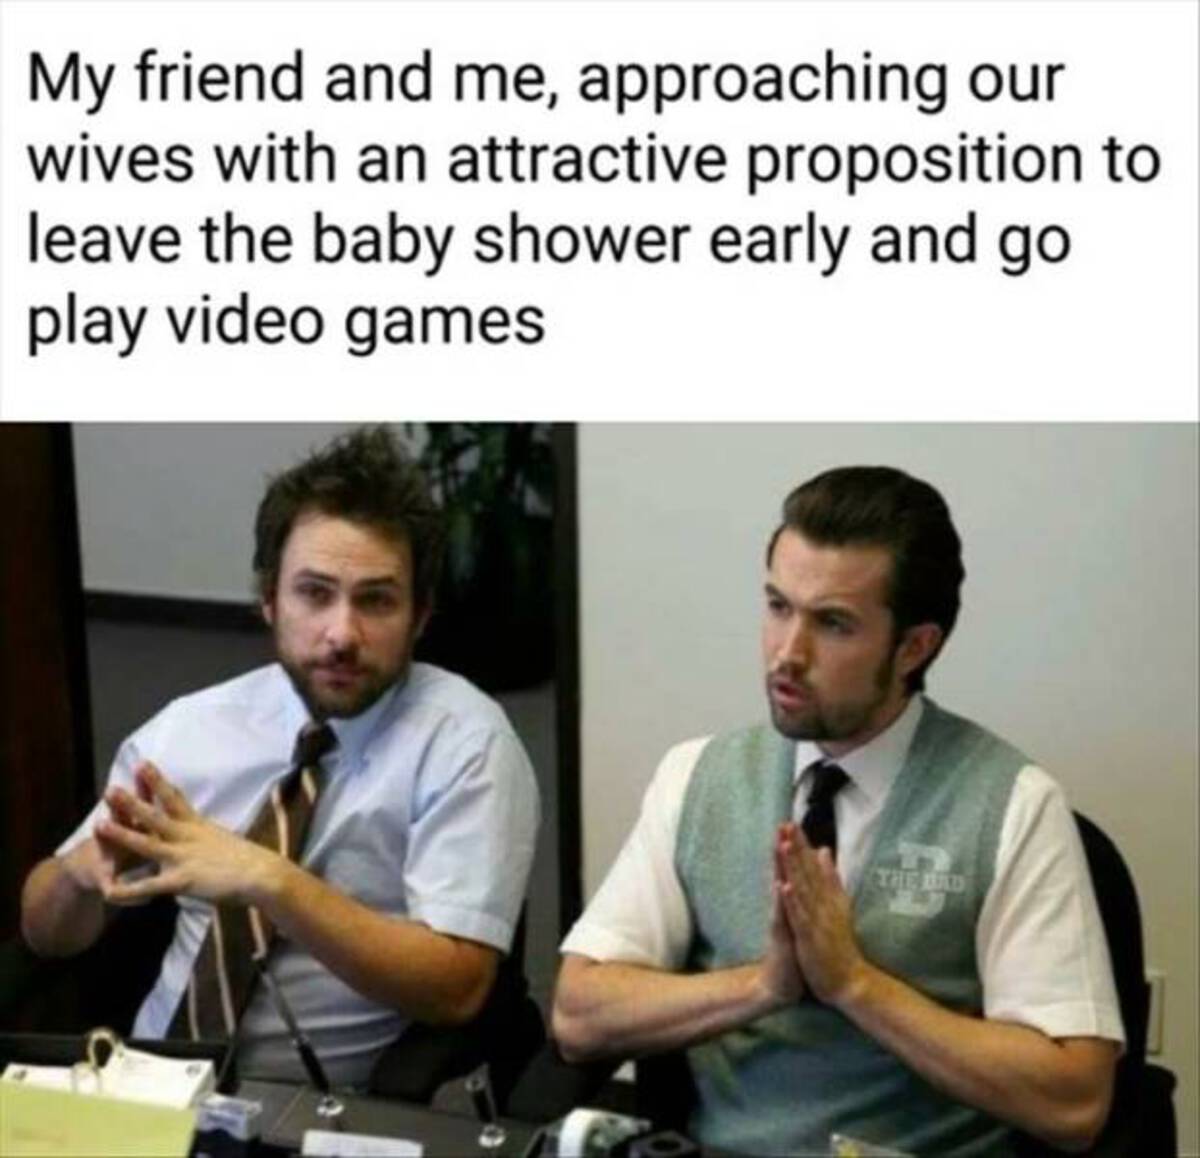 always sunny taking care of business - My friend and me, approaching our wives with an attractive proposition to leave the baby shower early and go play video games The Bad